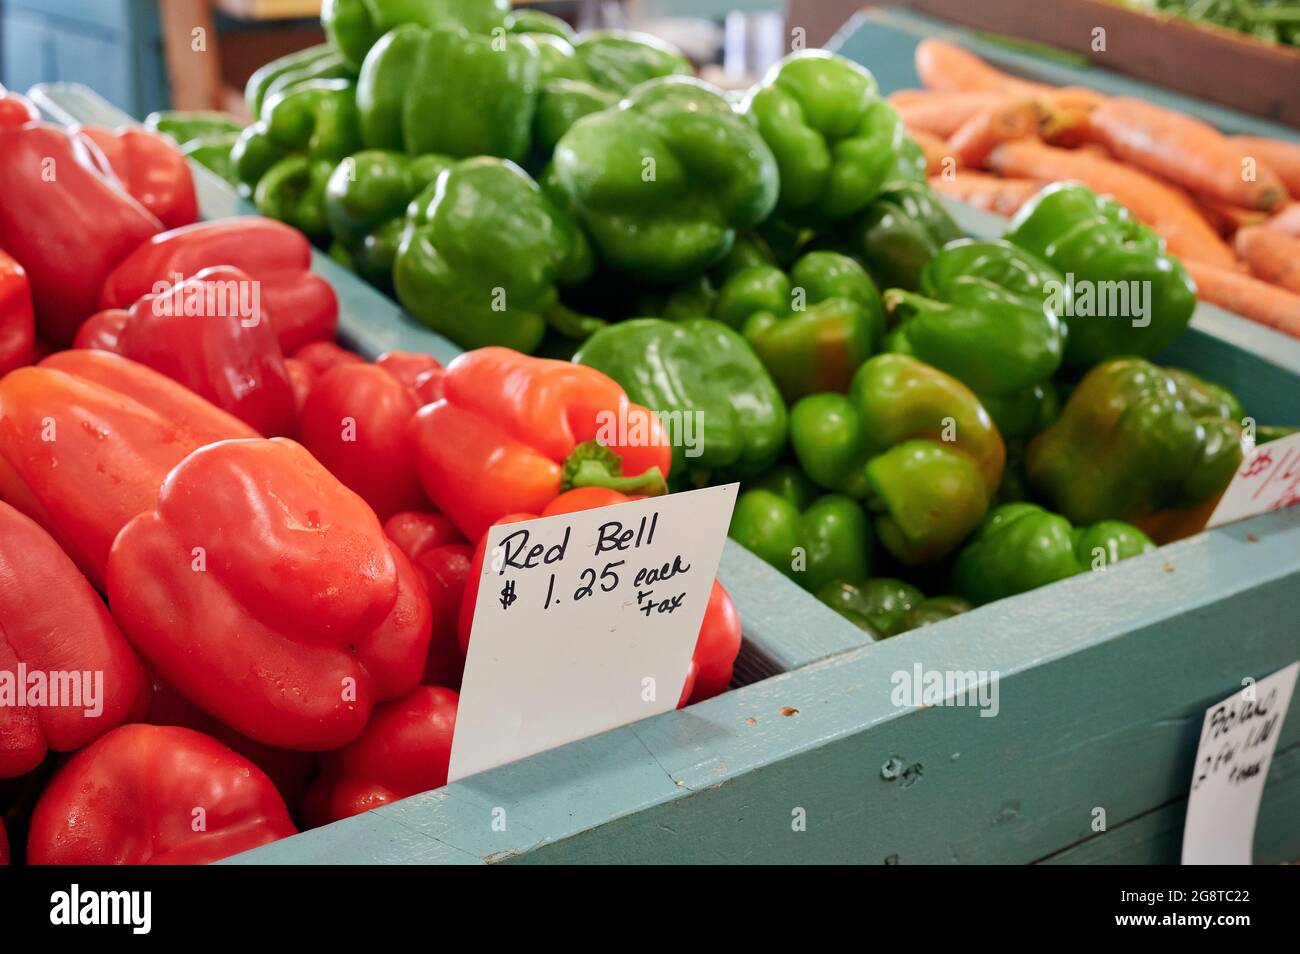 Red and green peppers in a display of fresh vegetables and produce, for sale at a farm or farmers market. Stock Photo